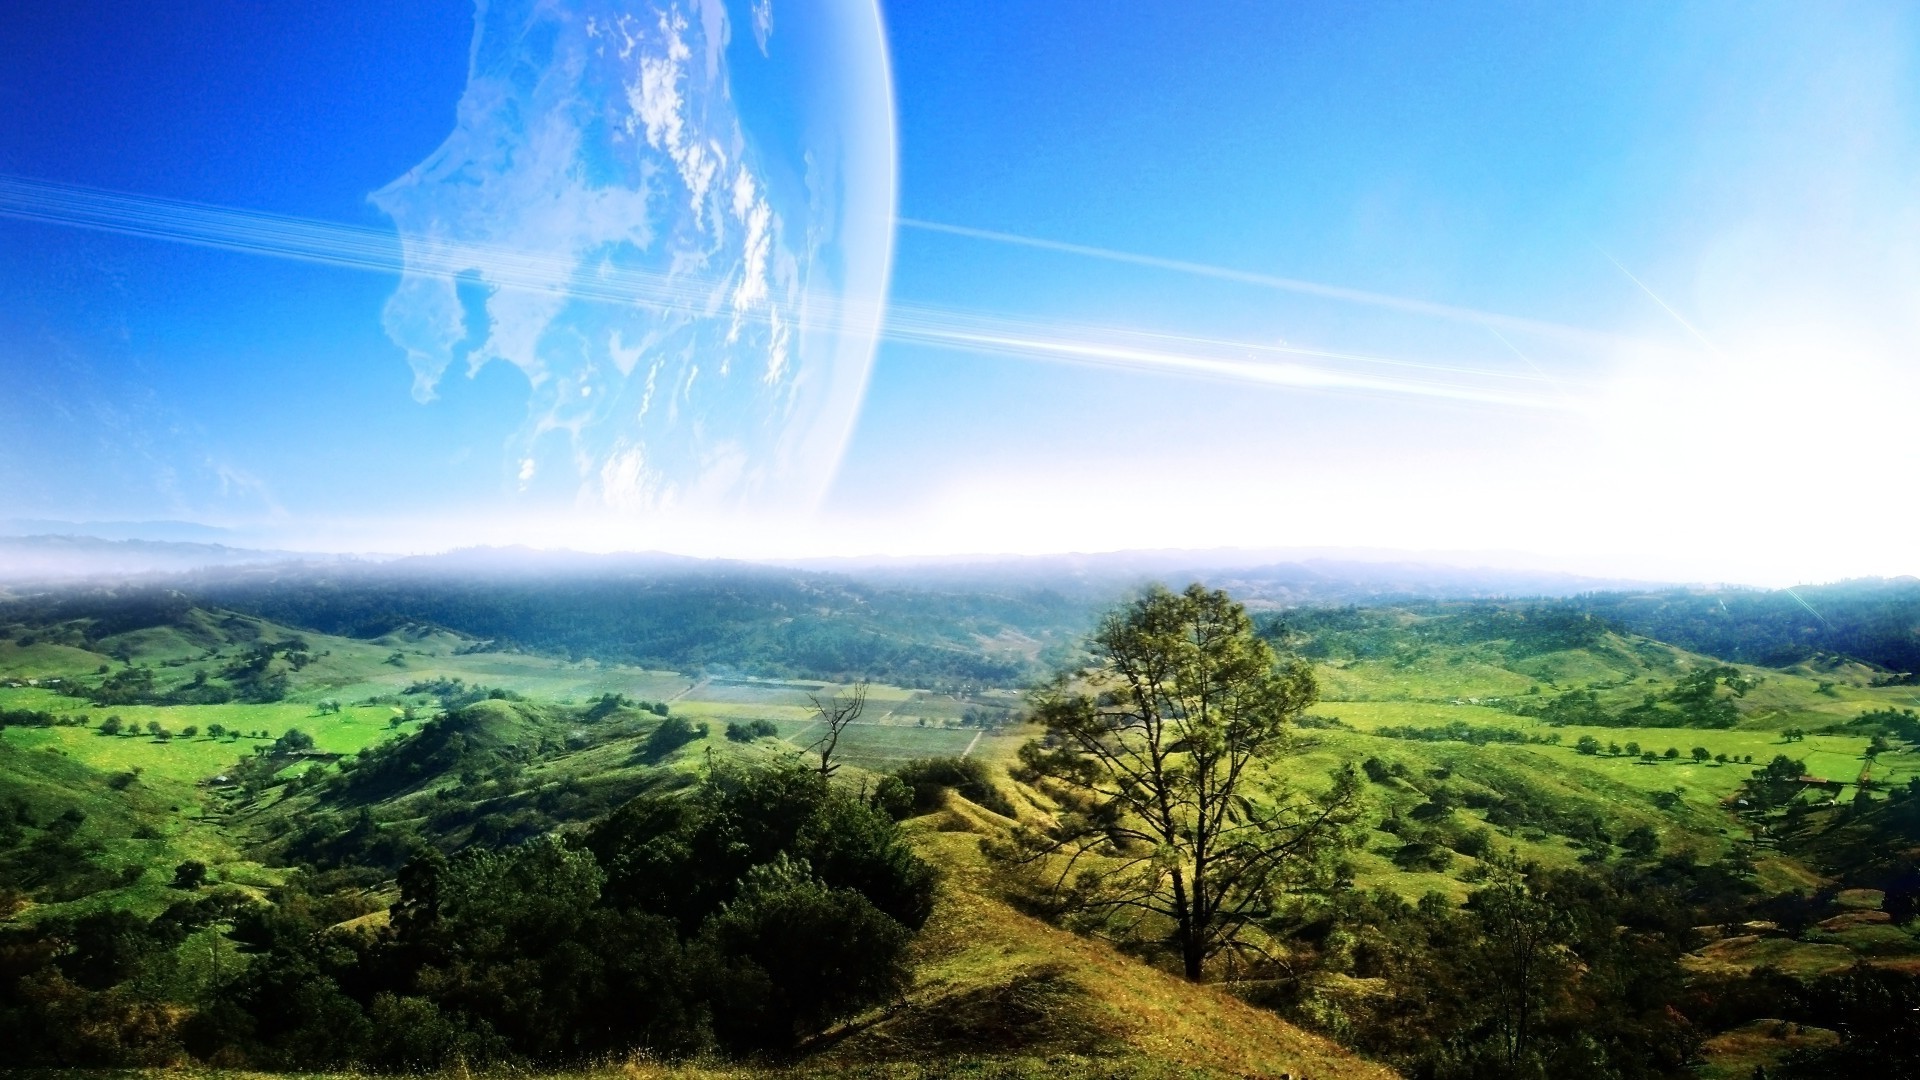 space landscape nature sky travel mountain scenic tree outdoors sight summer hill beautiful cloud grass fair weather environment